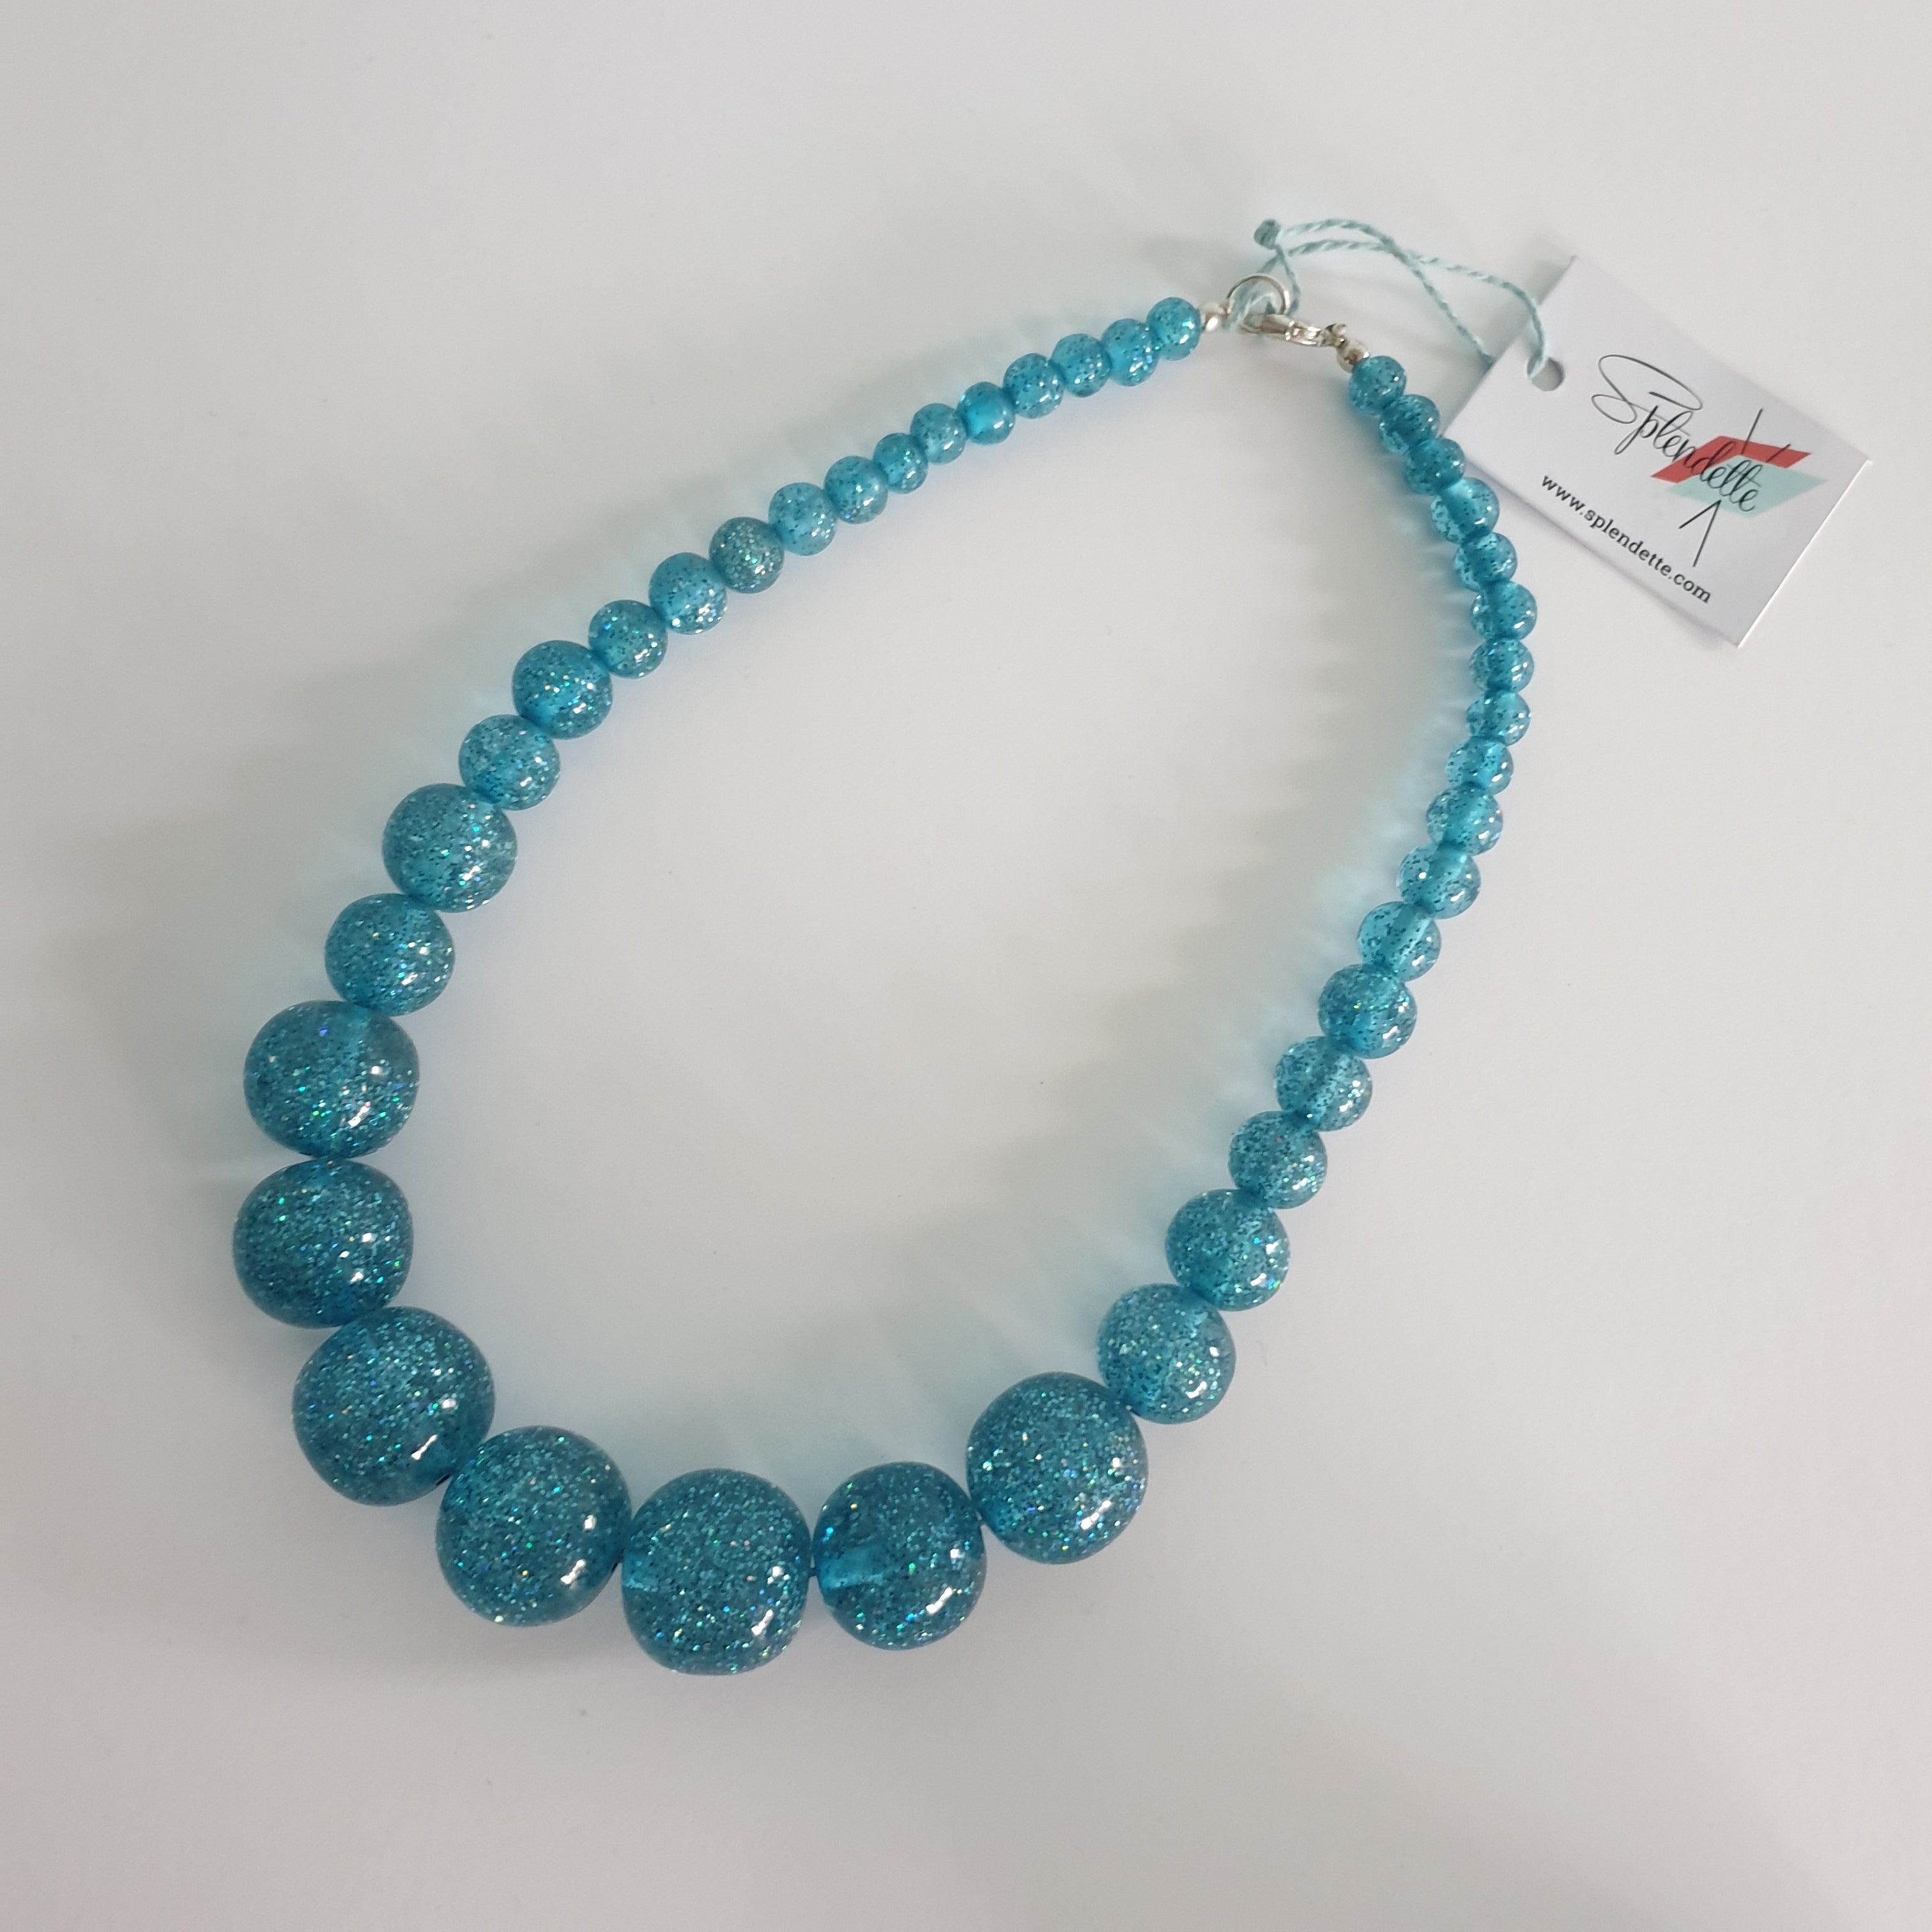 New Teal Glitter Bead Necklace